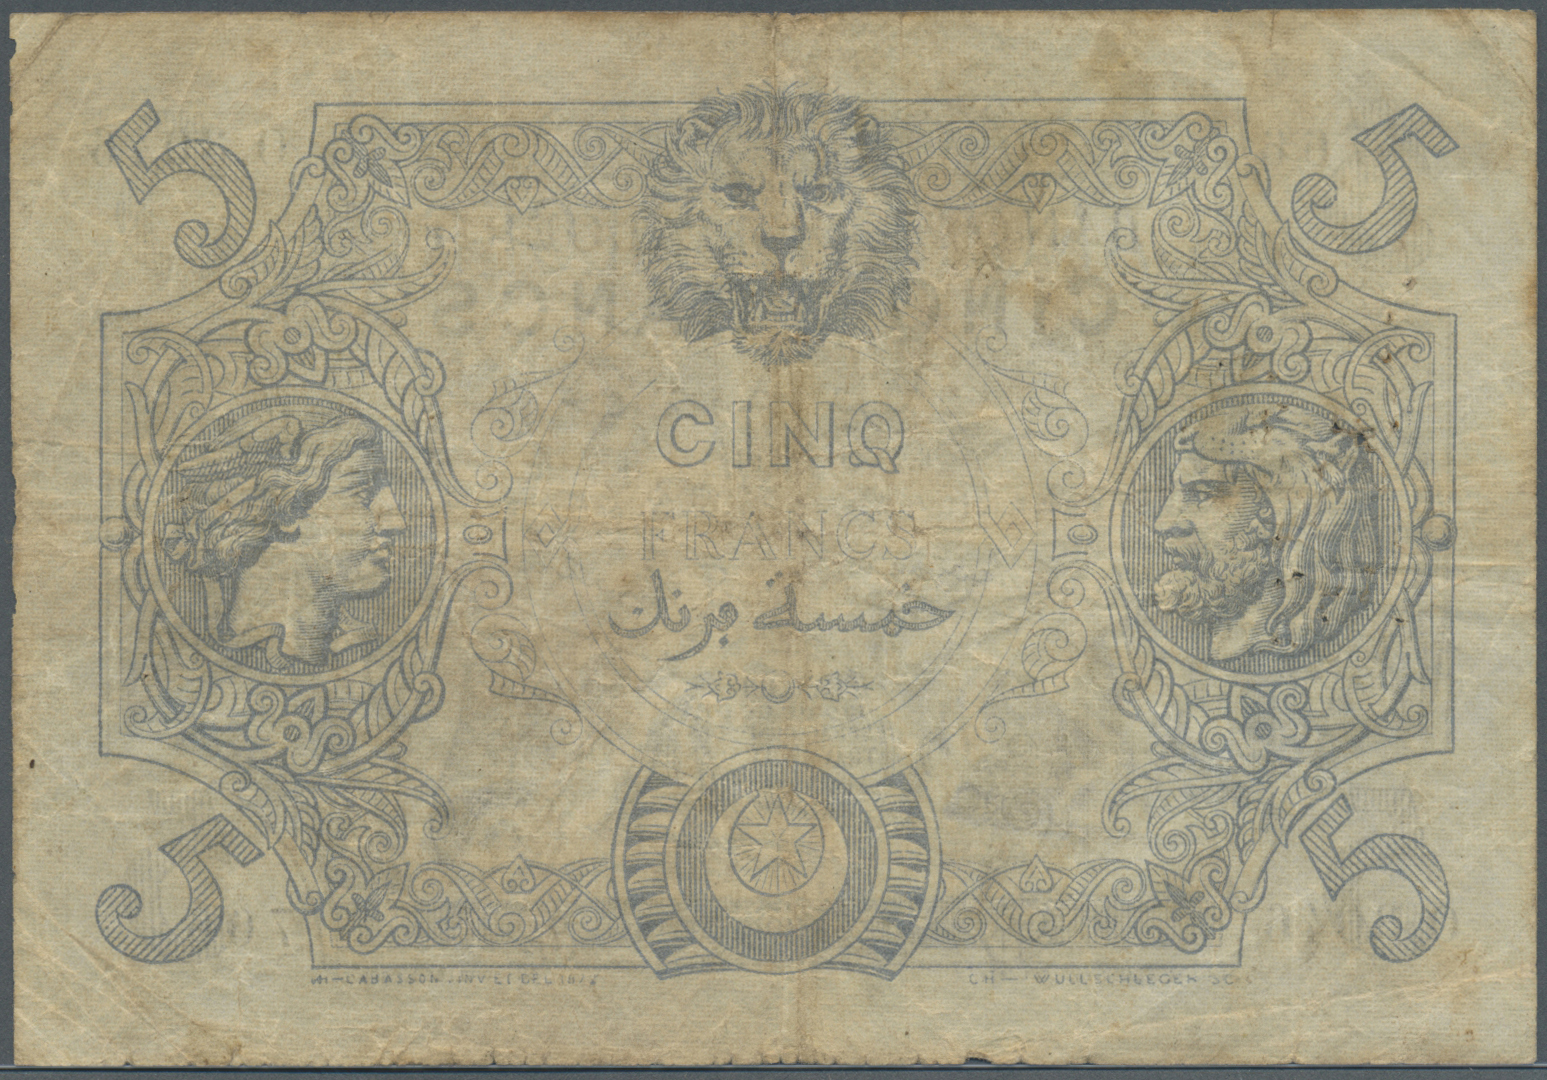 00009 Algeria / Algerien: 5 Francs 1924 P. 71b, Used With Several Folds And Creases, Lots Of Pinholes At Right, Minor Bo - Algérie